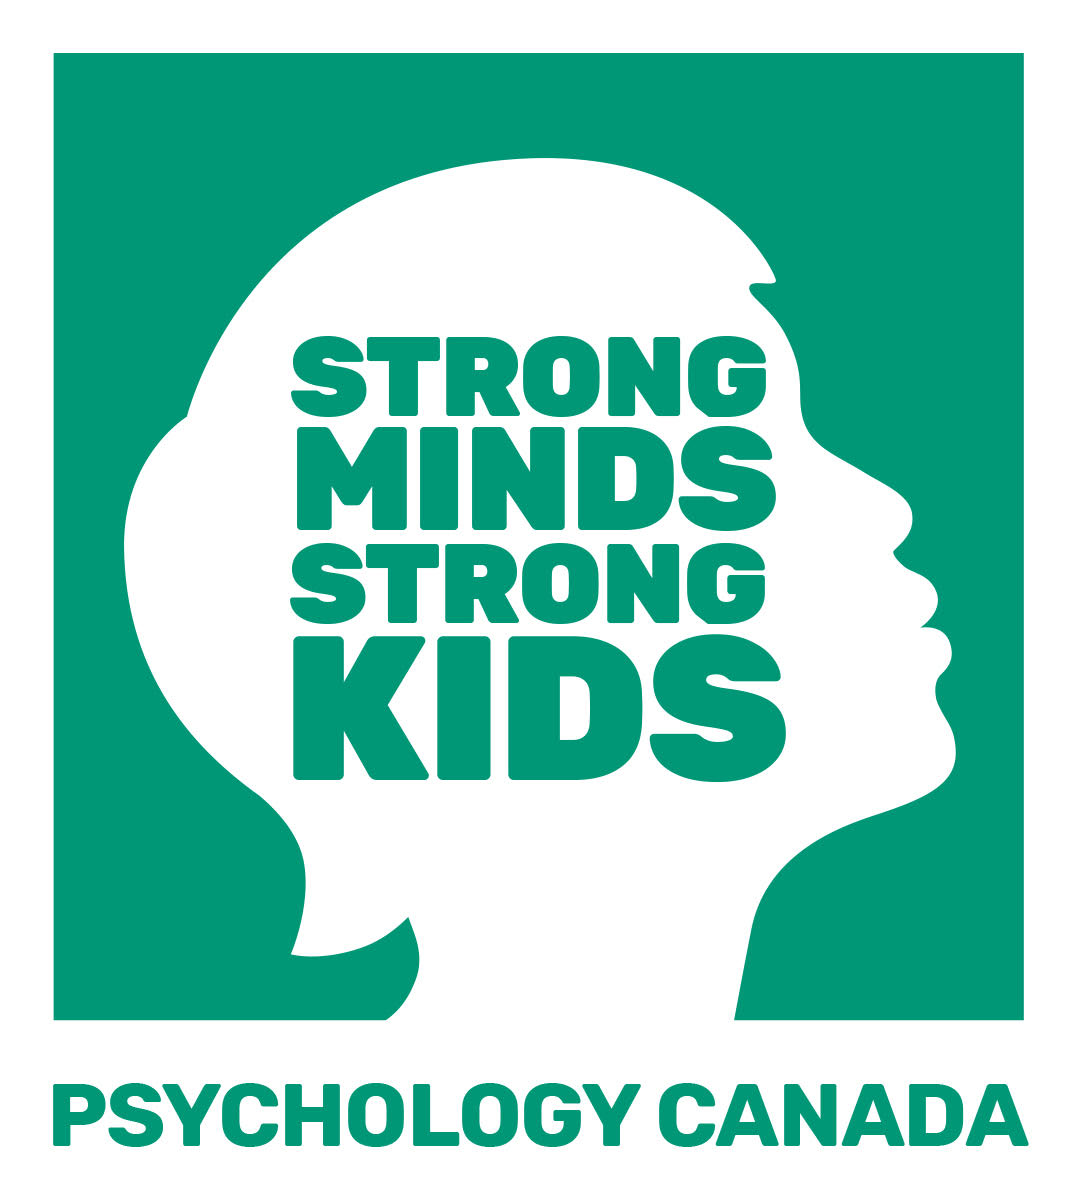 THE PSYCHOLOGY FOUNDATION OF CANADA and STRONG MINDS STRONG KIDS logo